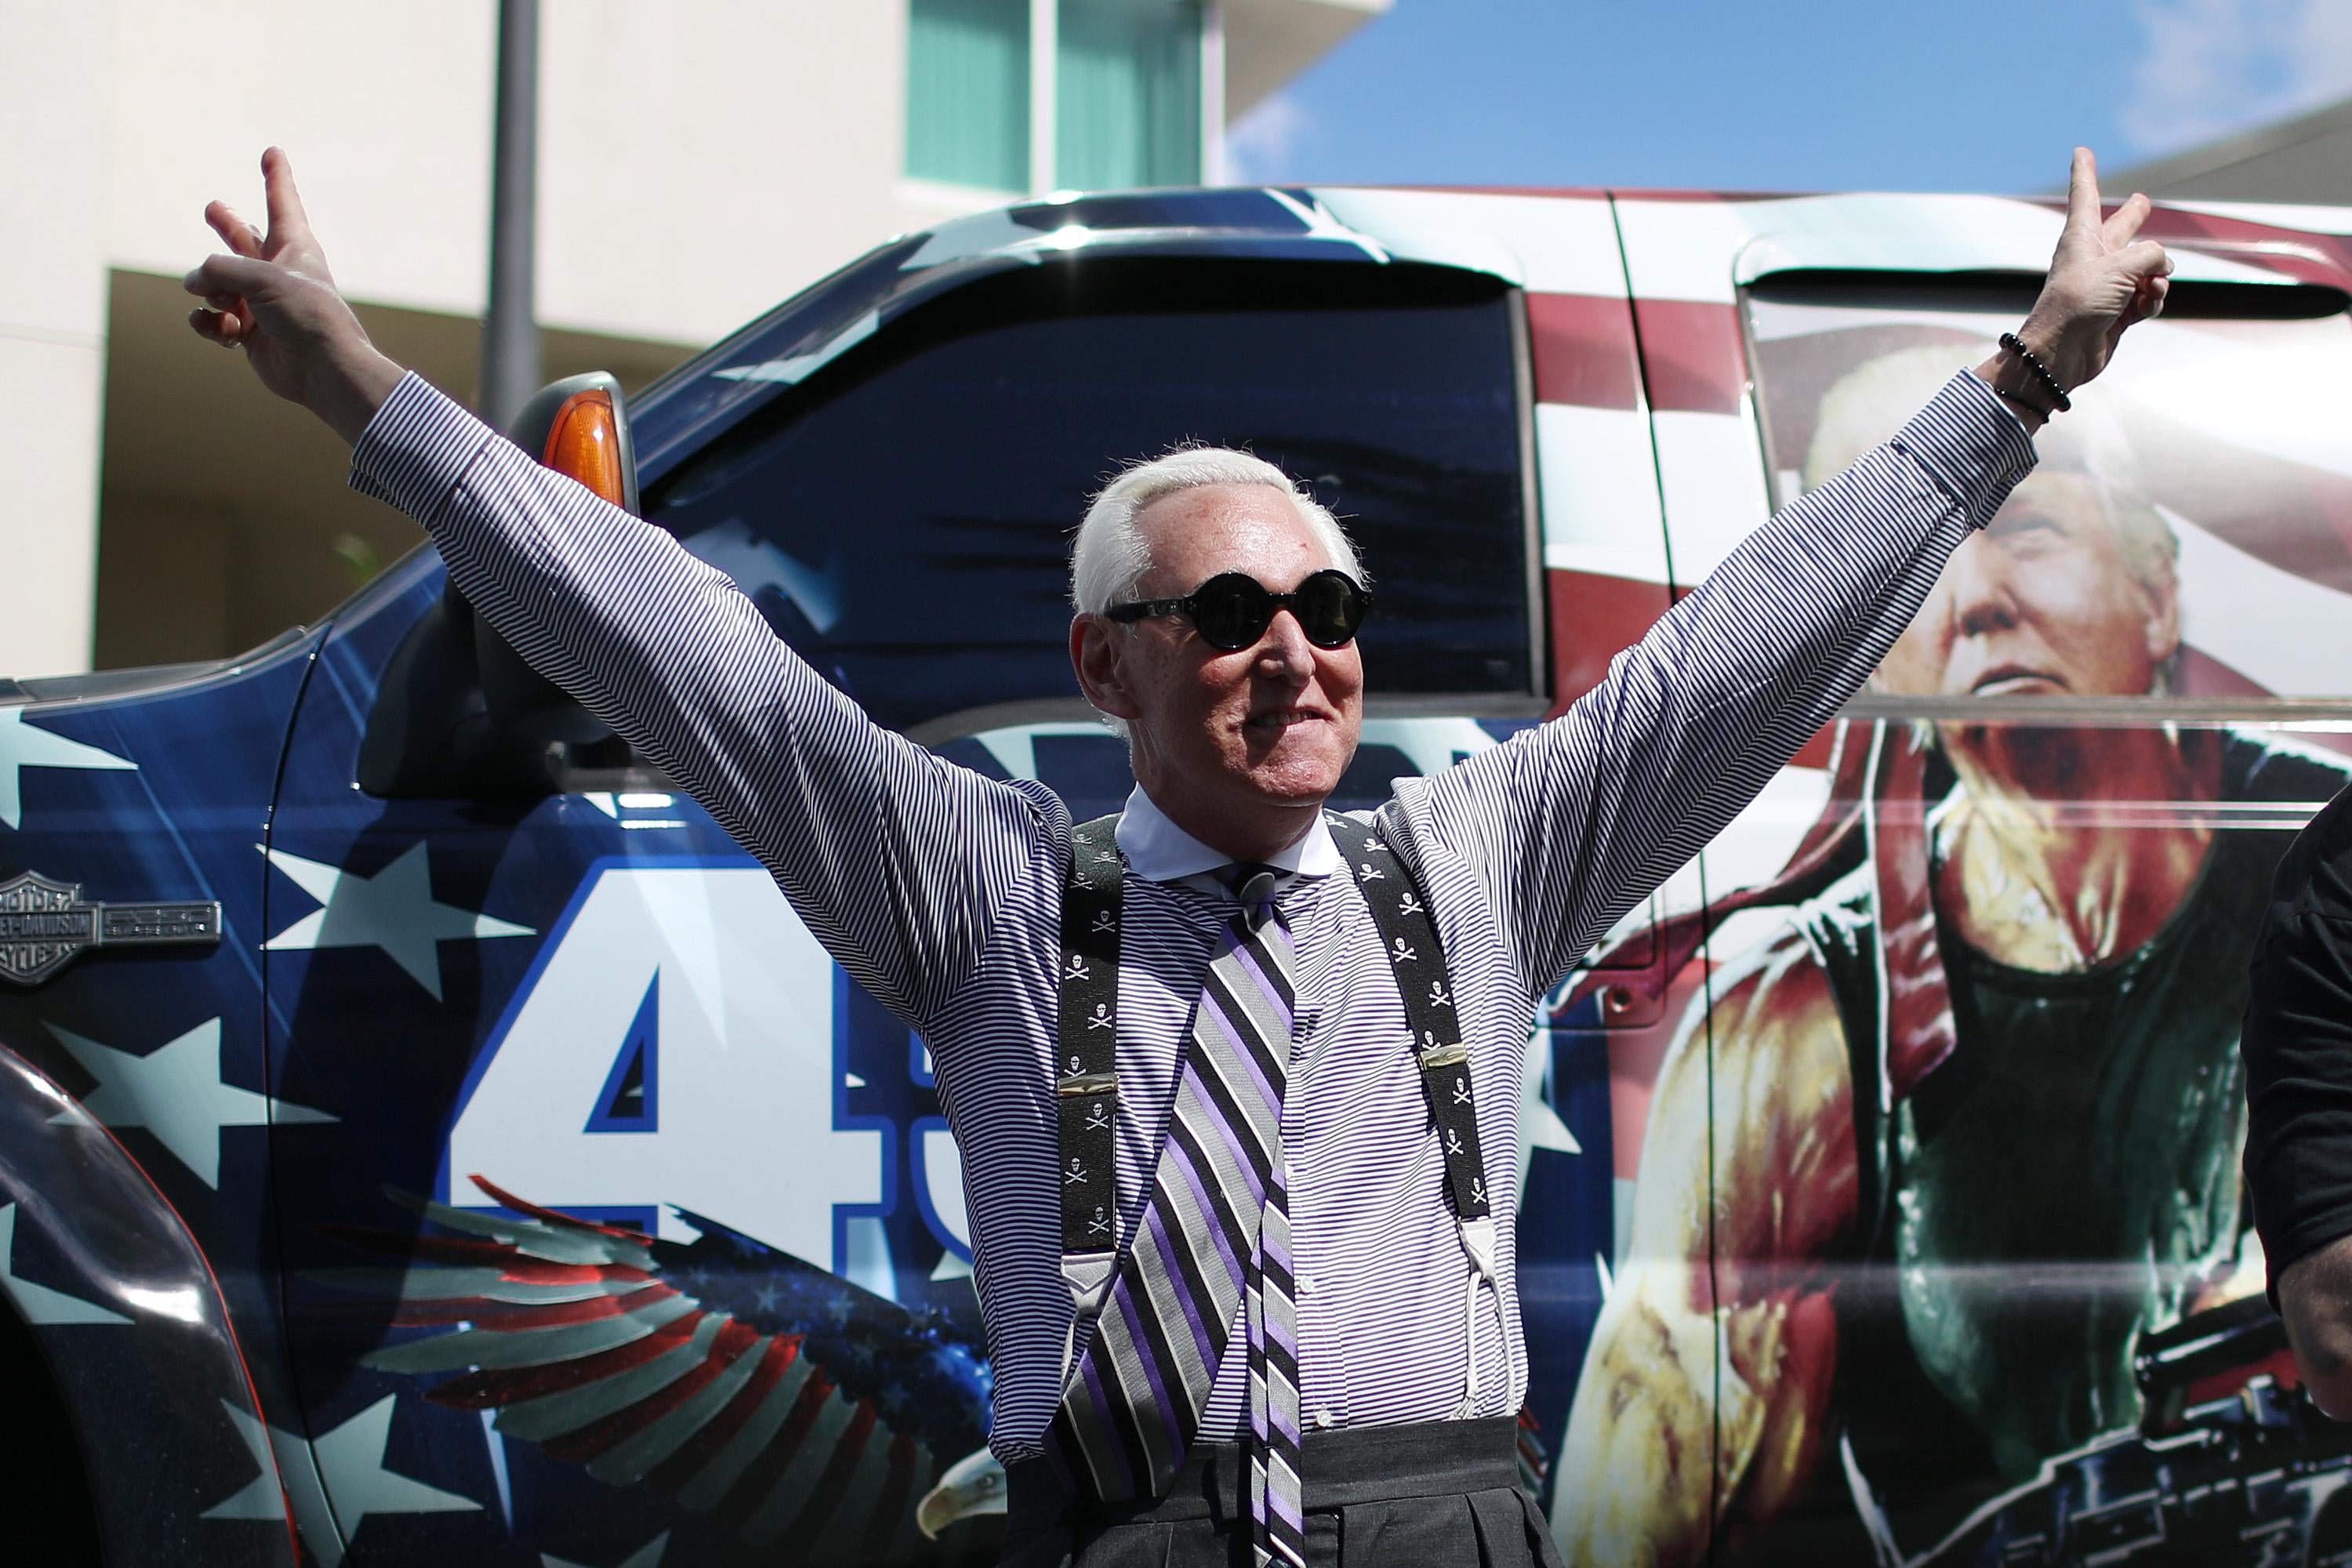 Roger Stone arrives for the Conservative Political Action Conference held in the Hyatt Regency on February 27, 2021 in Orlando, Florida.